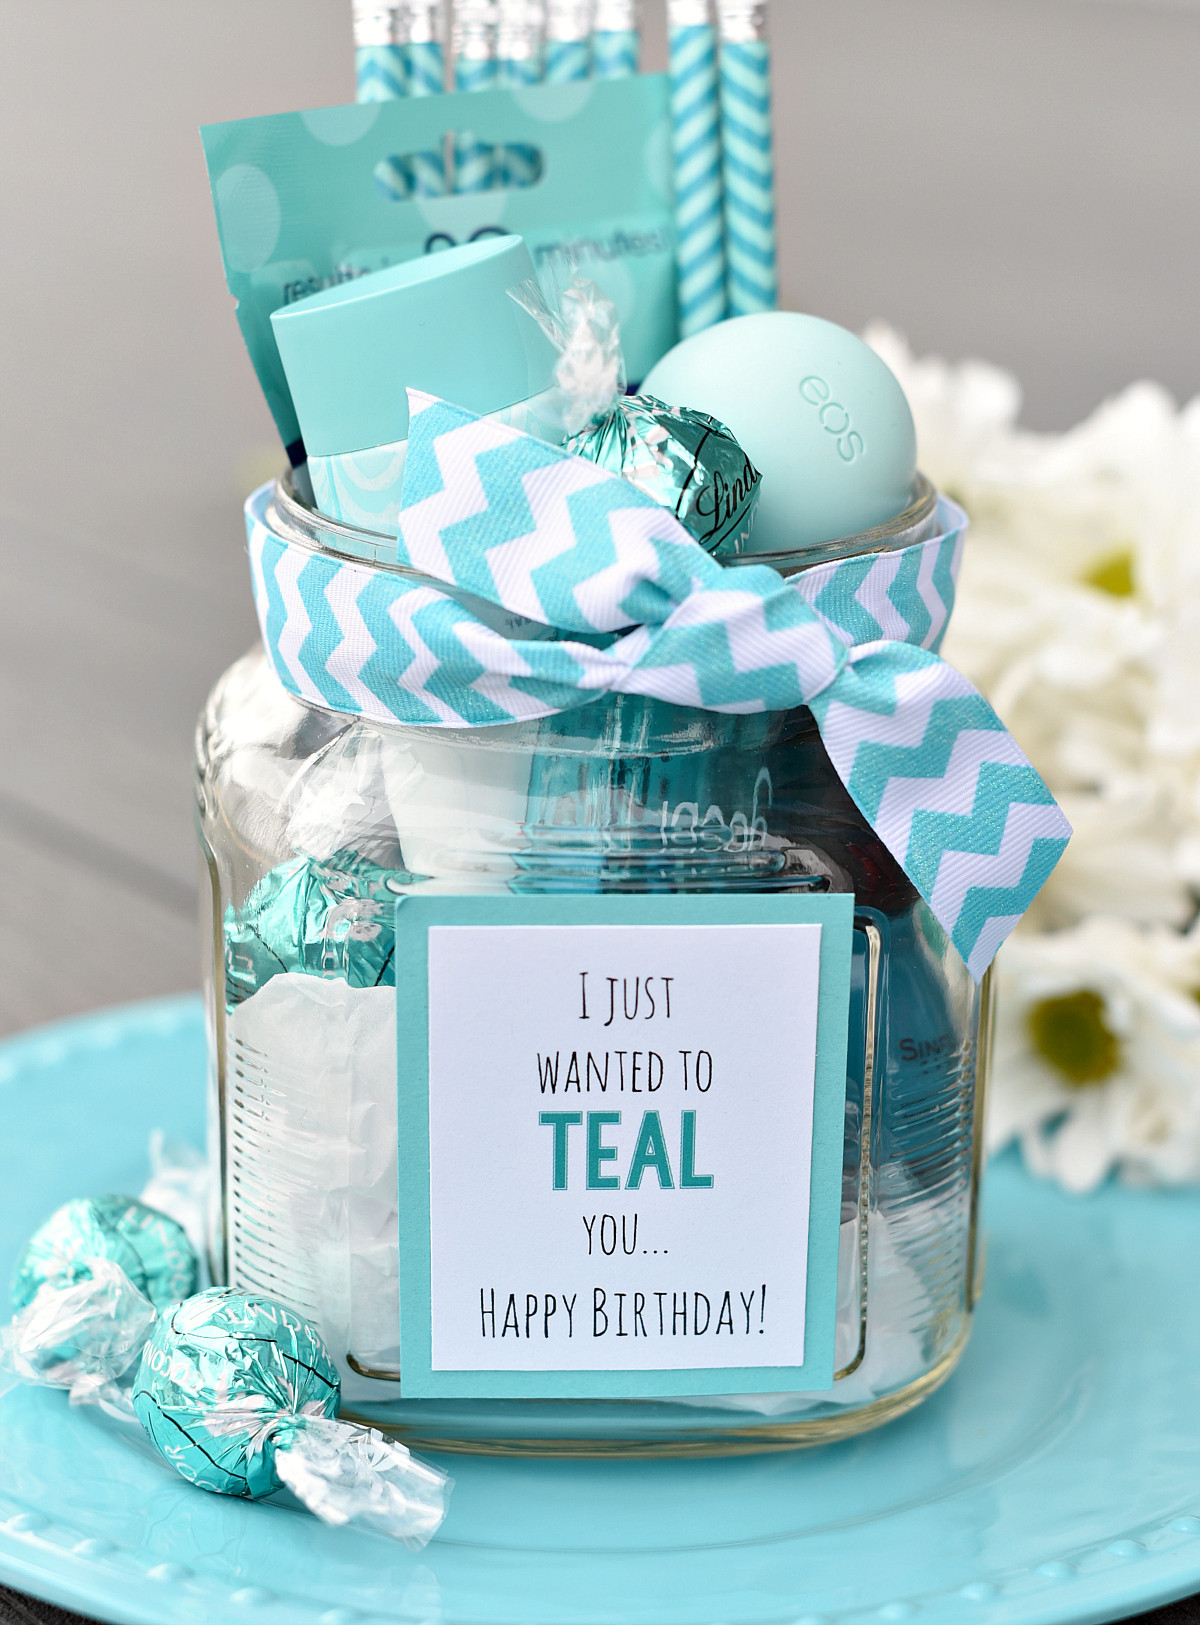 DIY Gifts For Birthday
 Teal Birthday Gift Idea for Friends – Fun Squared